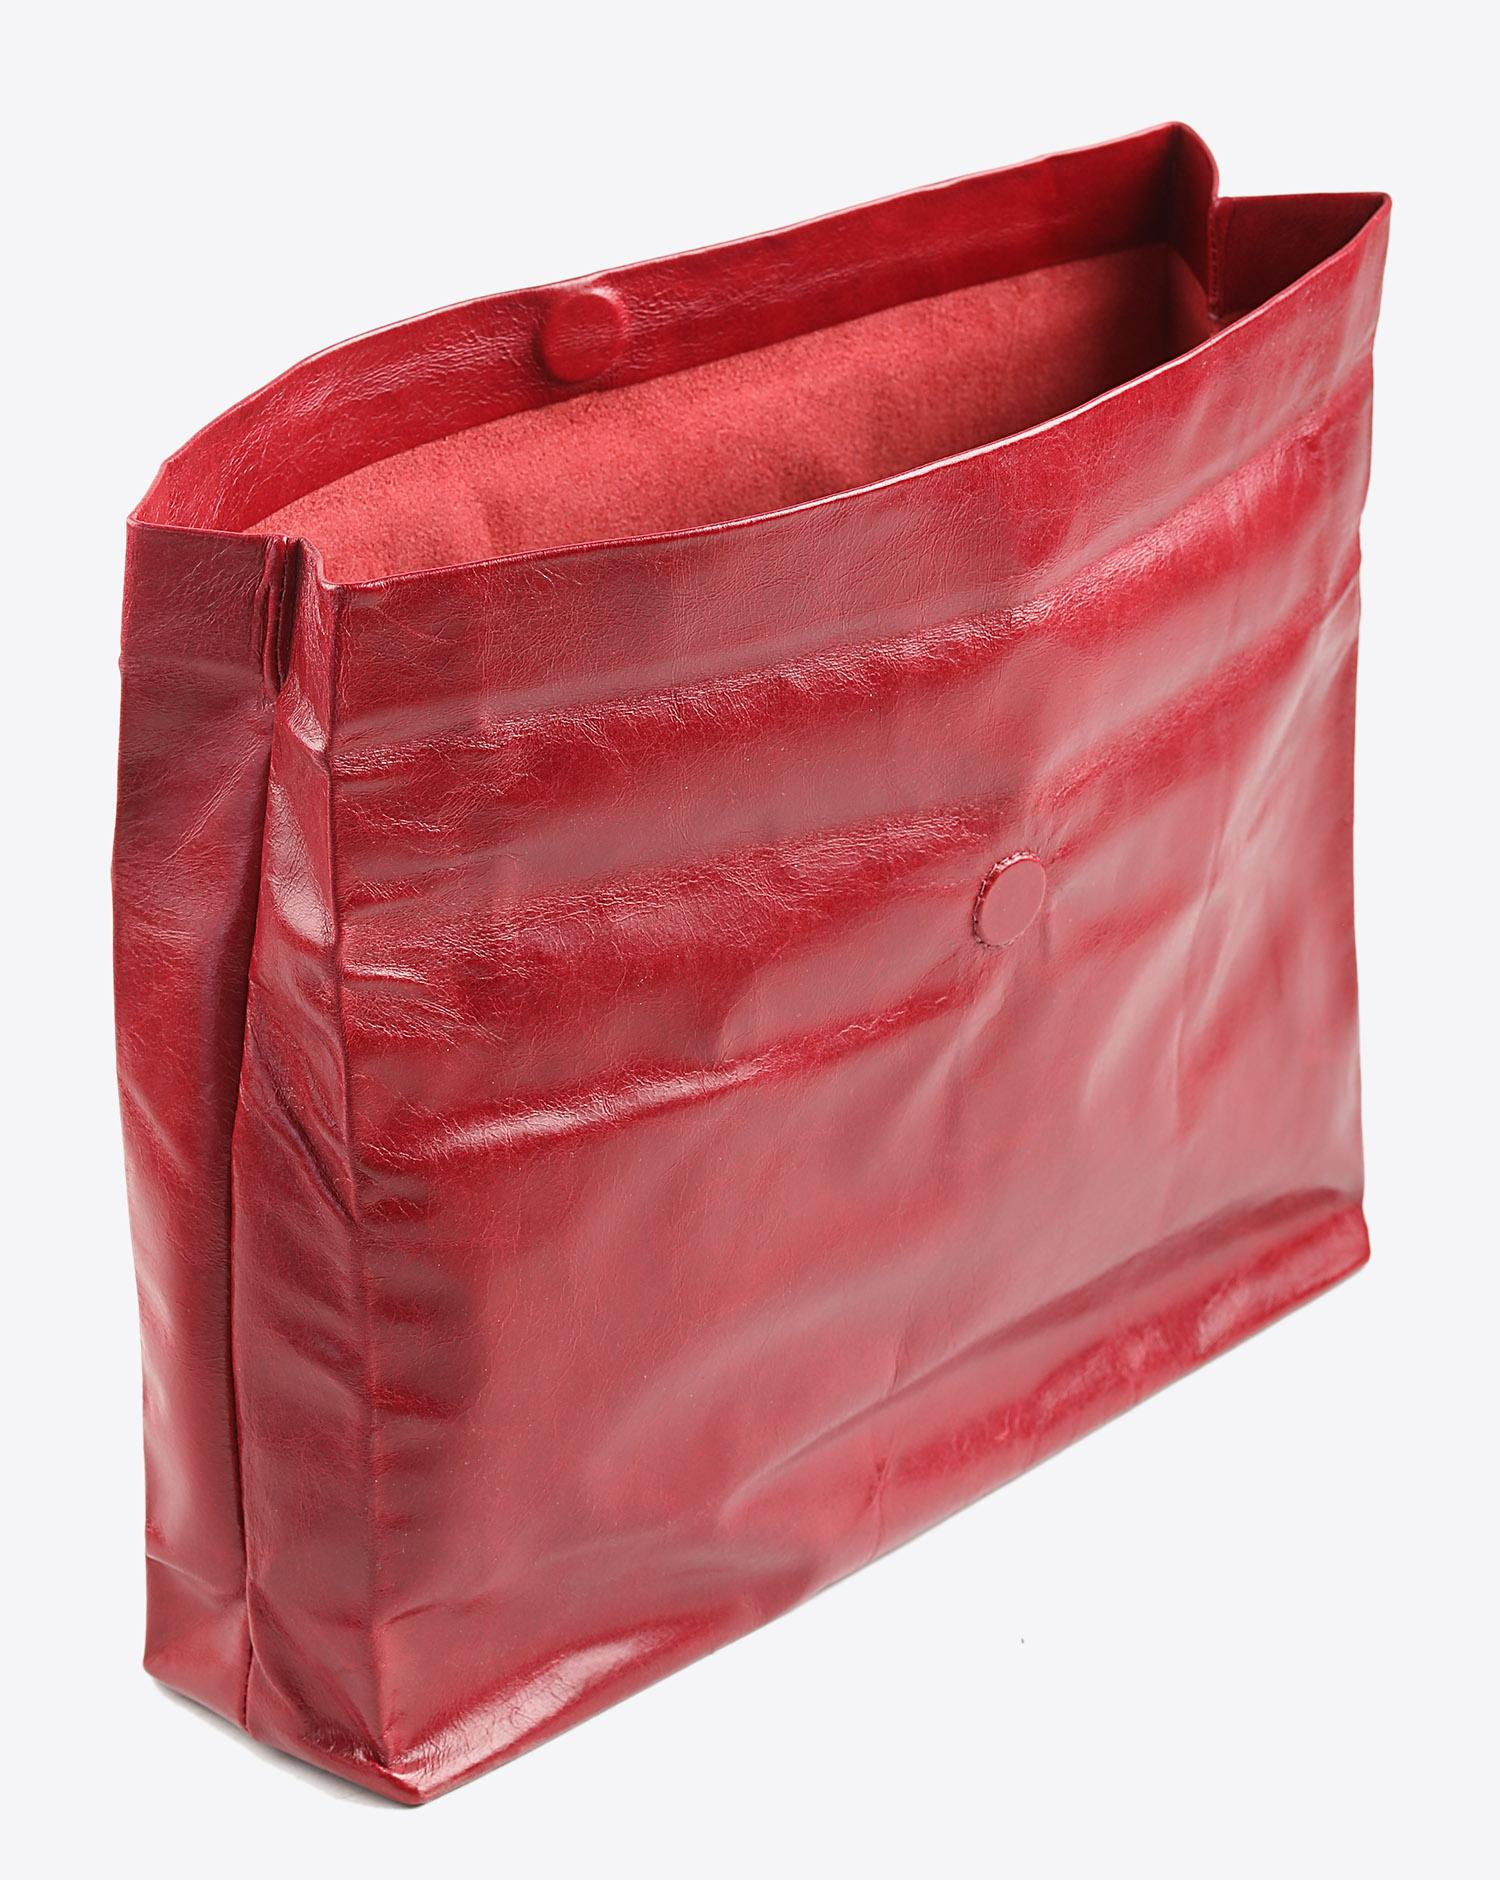 Marie Turnor Dinner Clutch - Red  